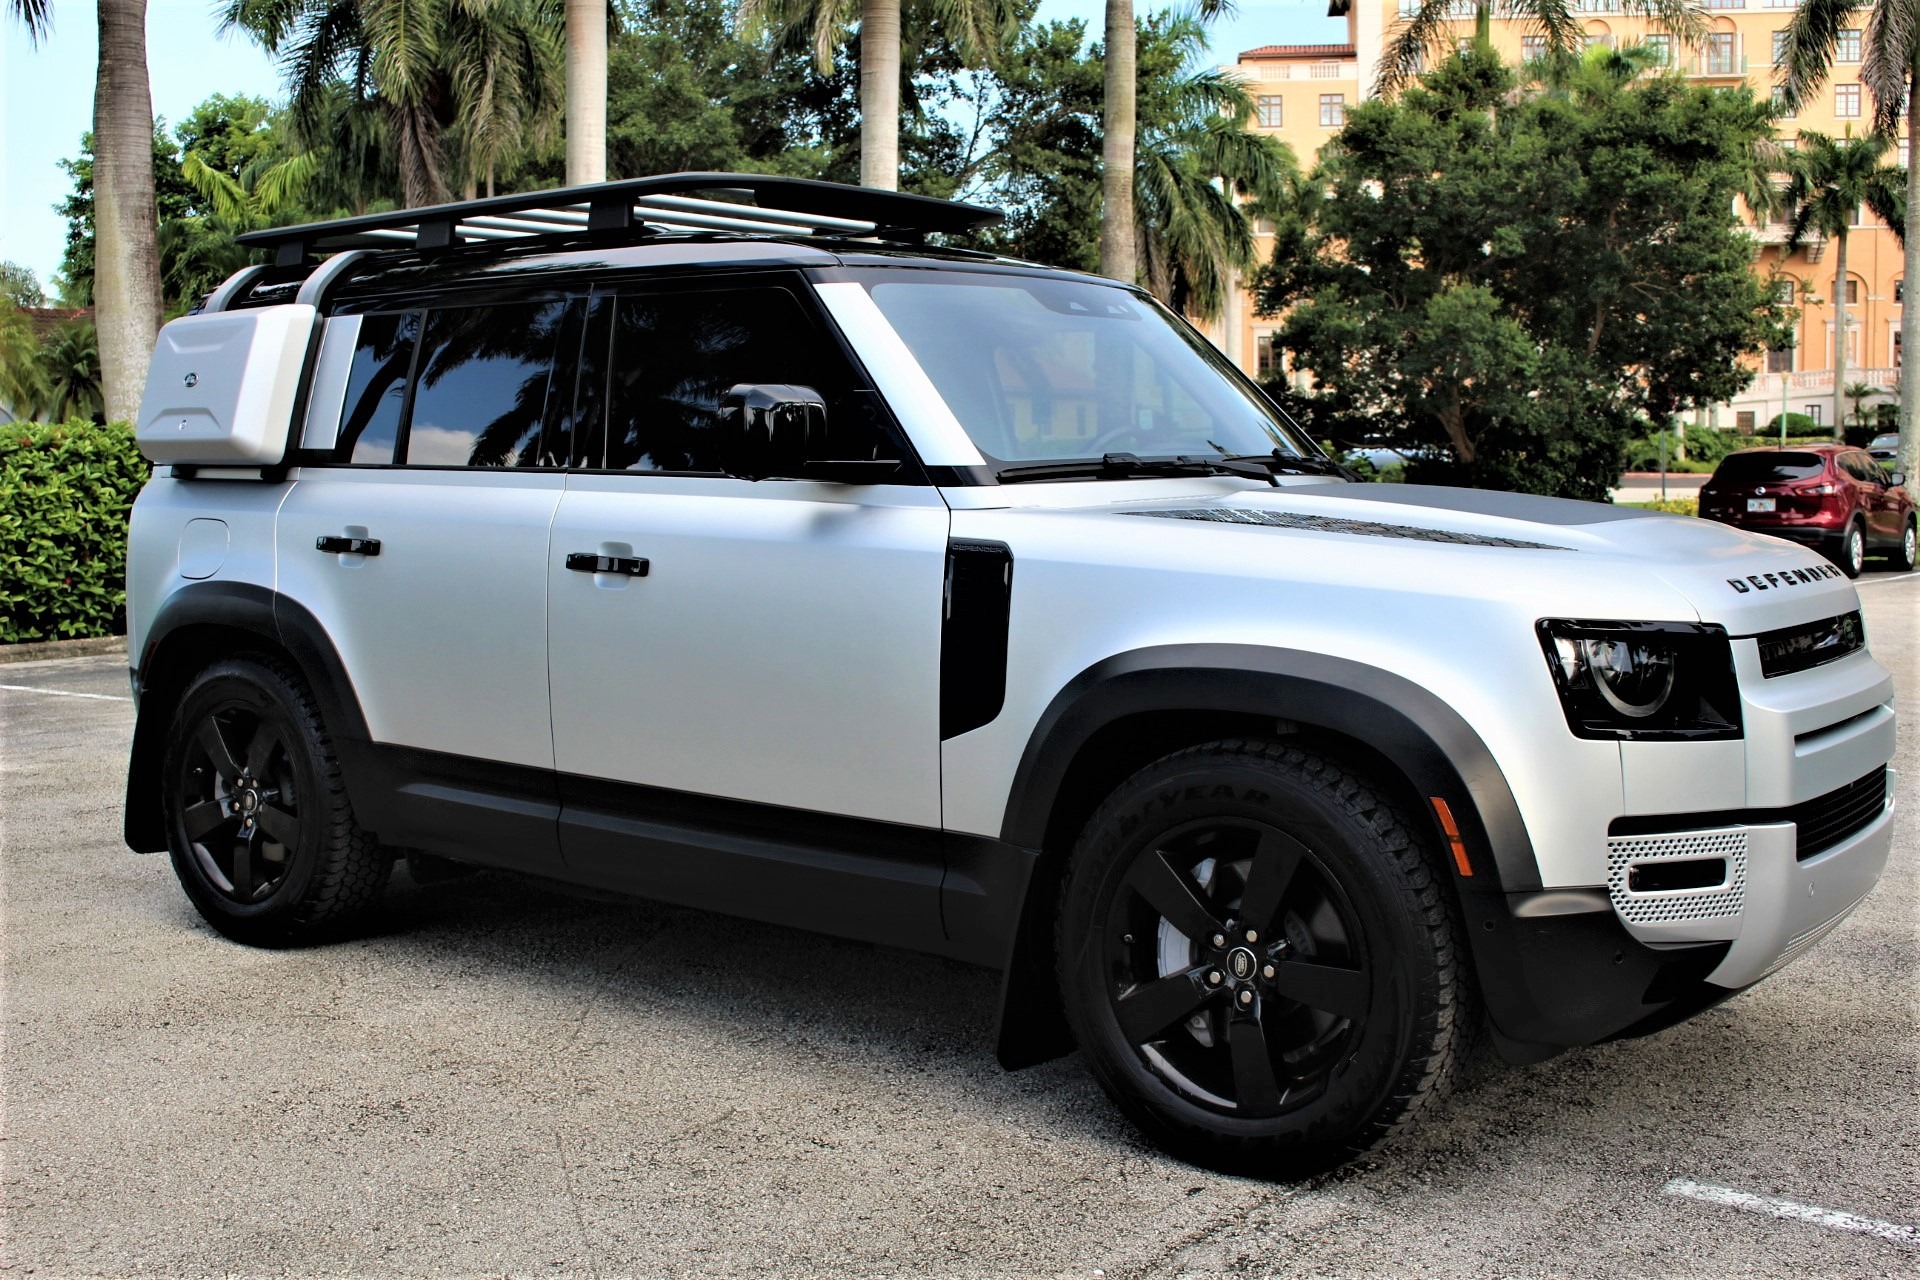 Used 2020 Land Rover Defender 110 HSE for sale Sold at The Gables Sports Cars in Miami FL 33146 4